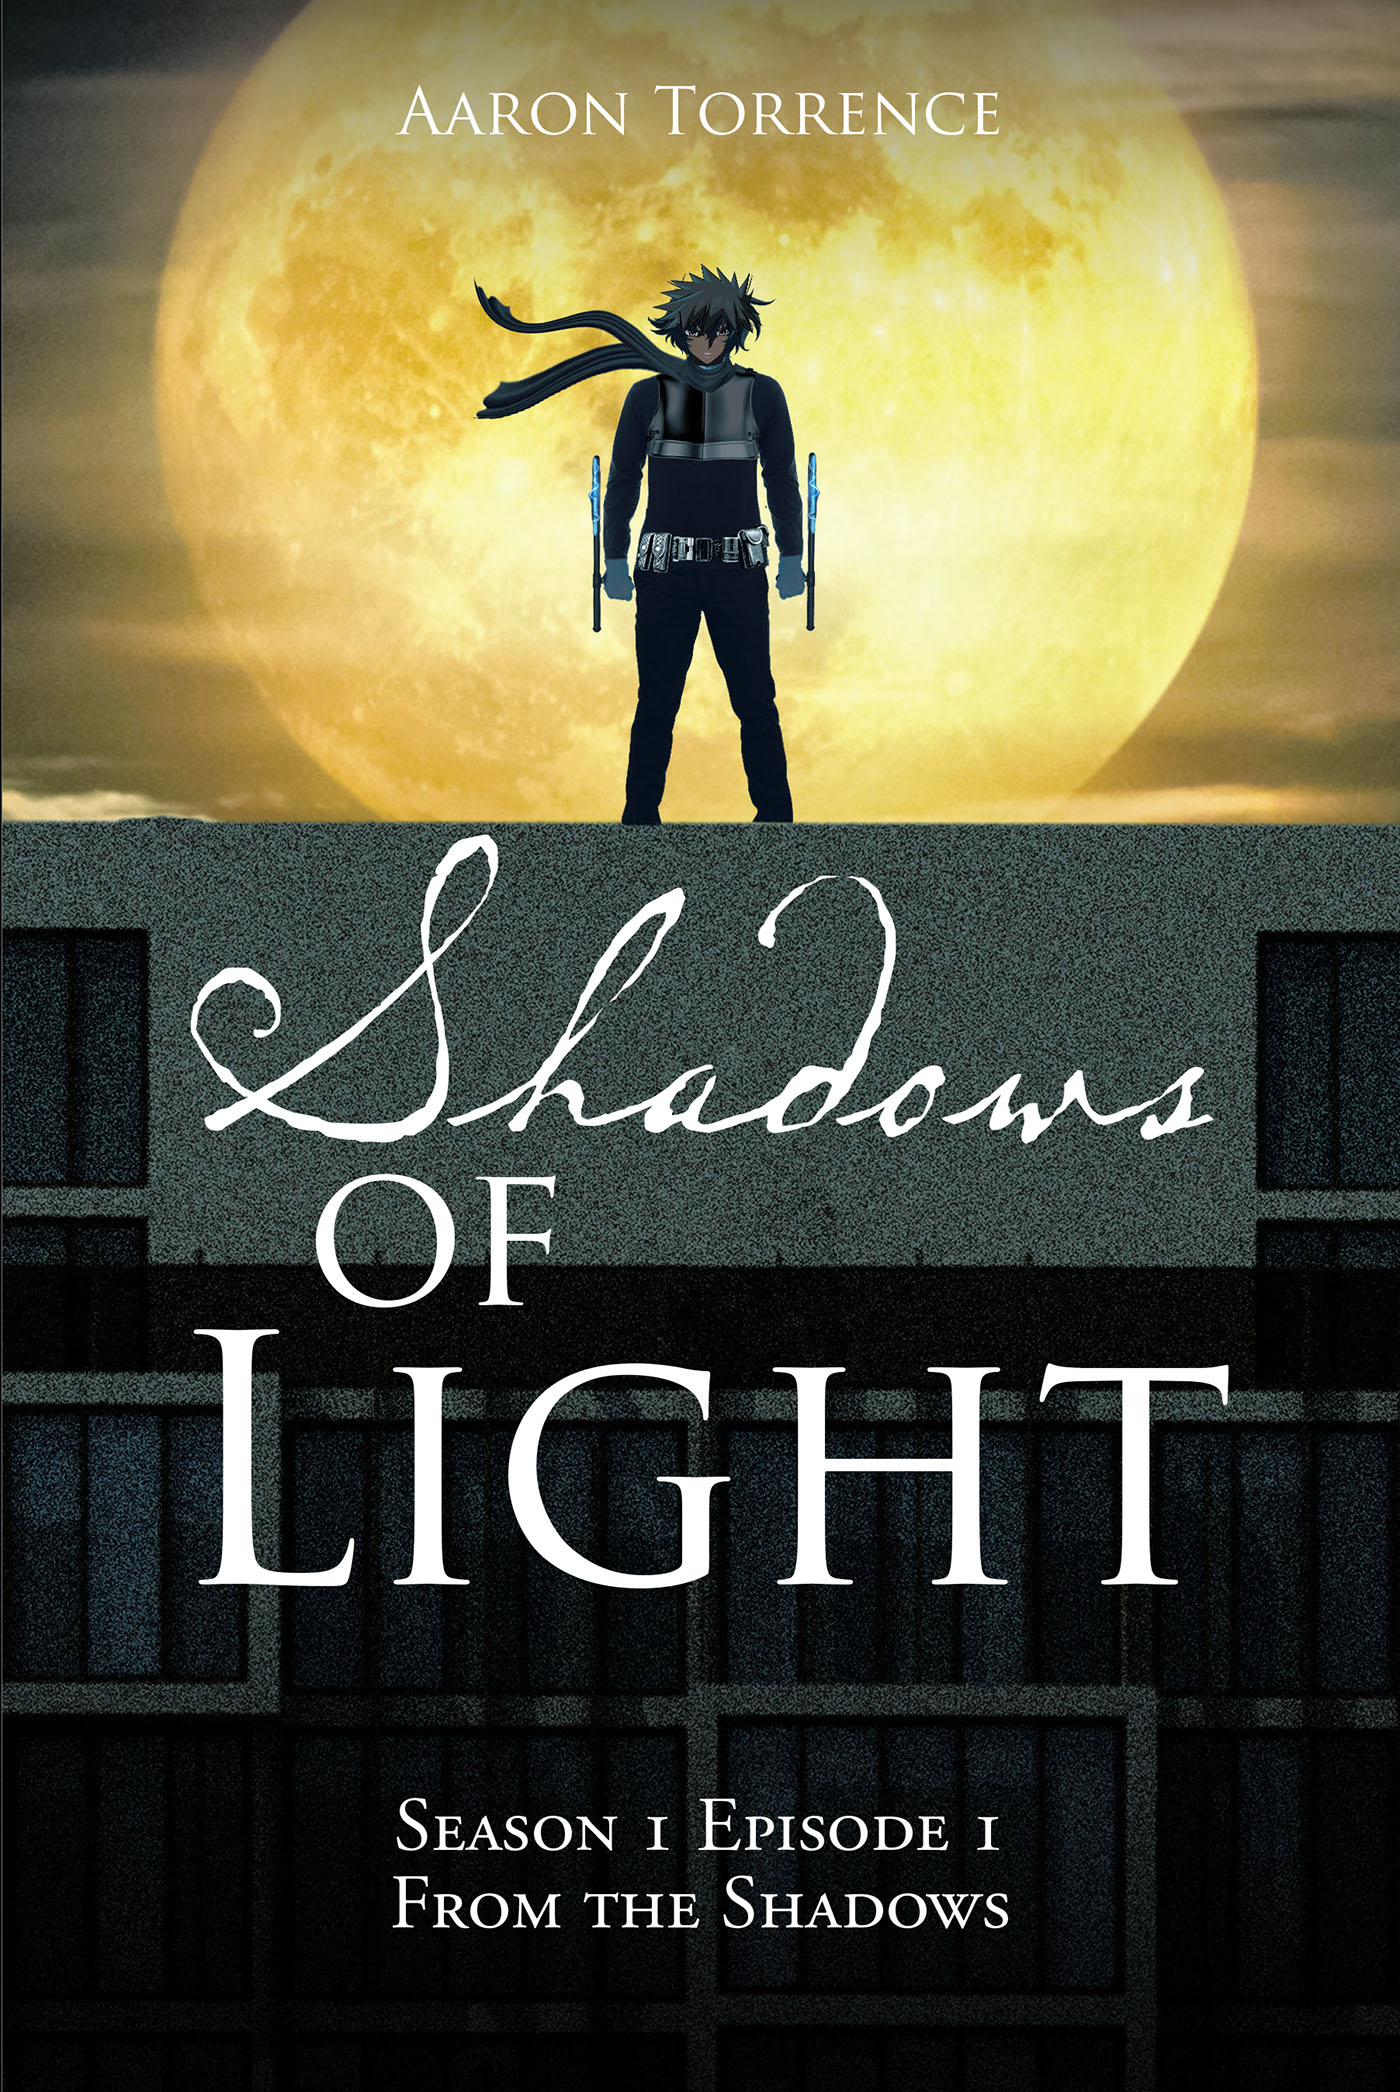 Aaron Torrence’s Newly Released "Shadows of Light: Season 1 Episode 1 From the Shadows" is an Exciting Fantasy Tale That Will Leave Readers Wanting More